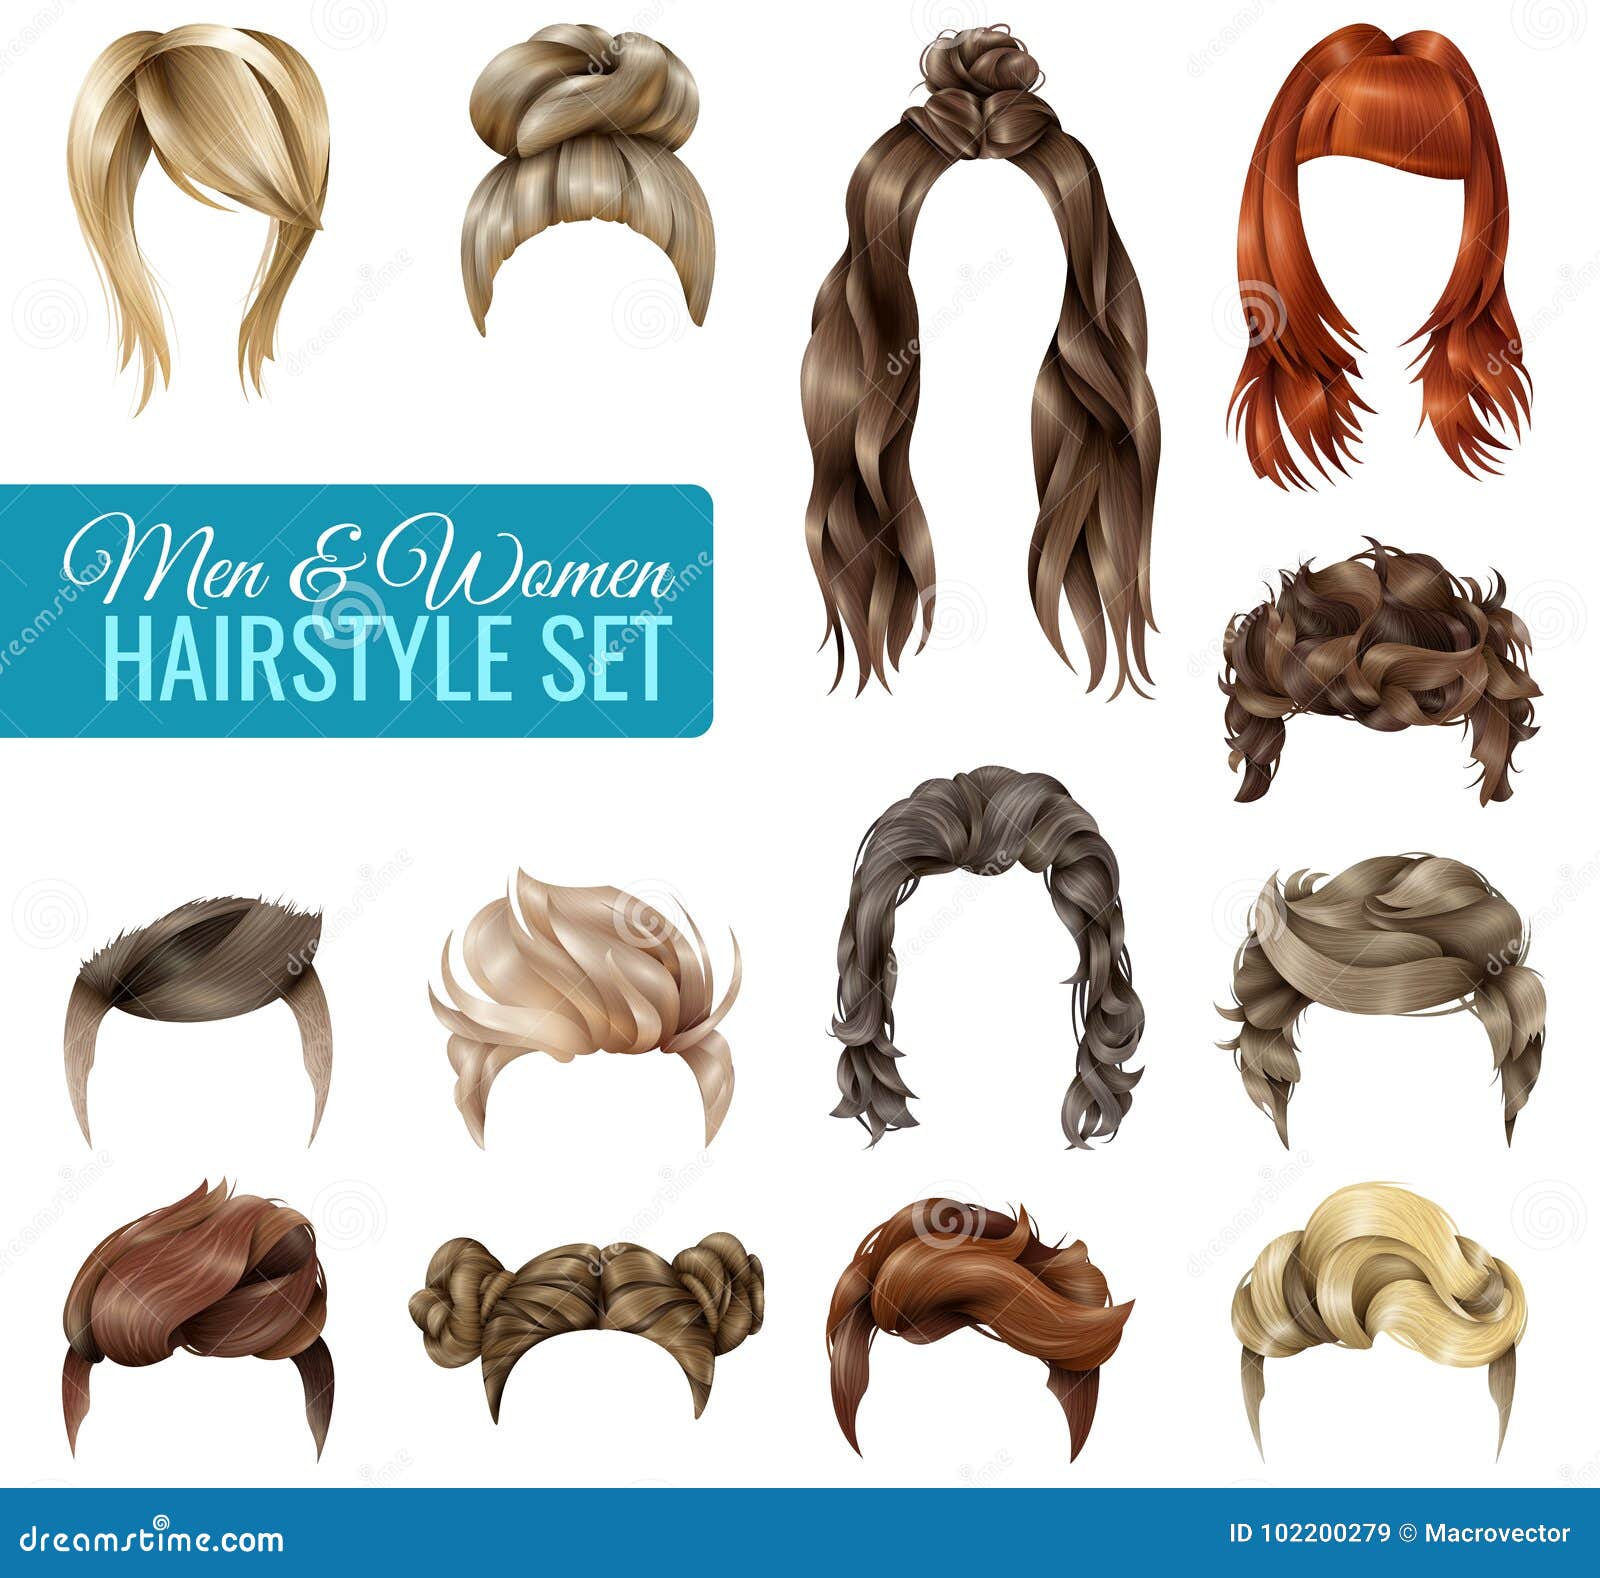 Realistic Hairstyle Set stock vector. Illustration of appearance - 102200279